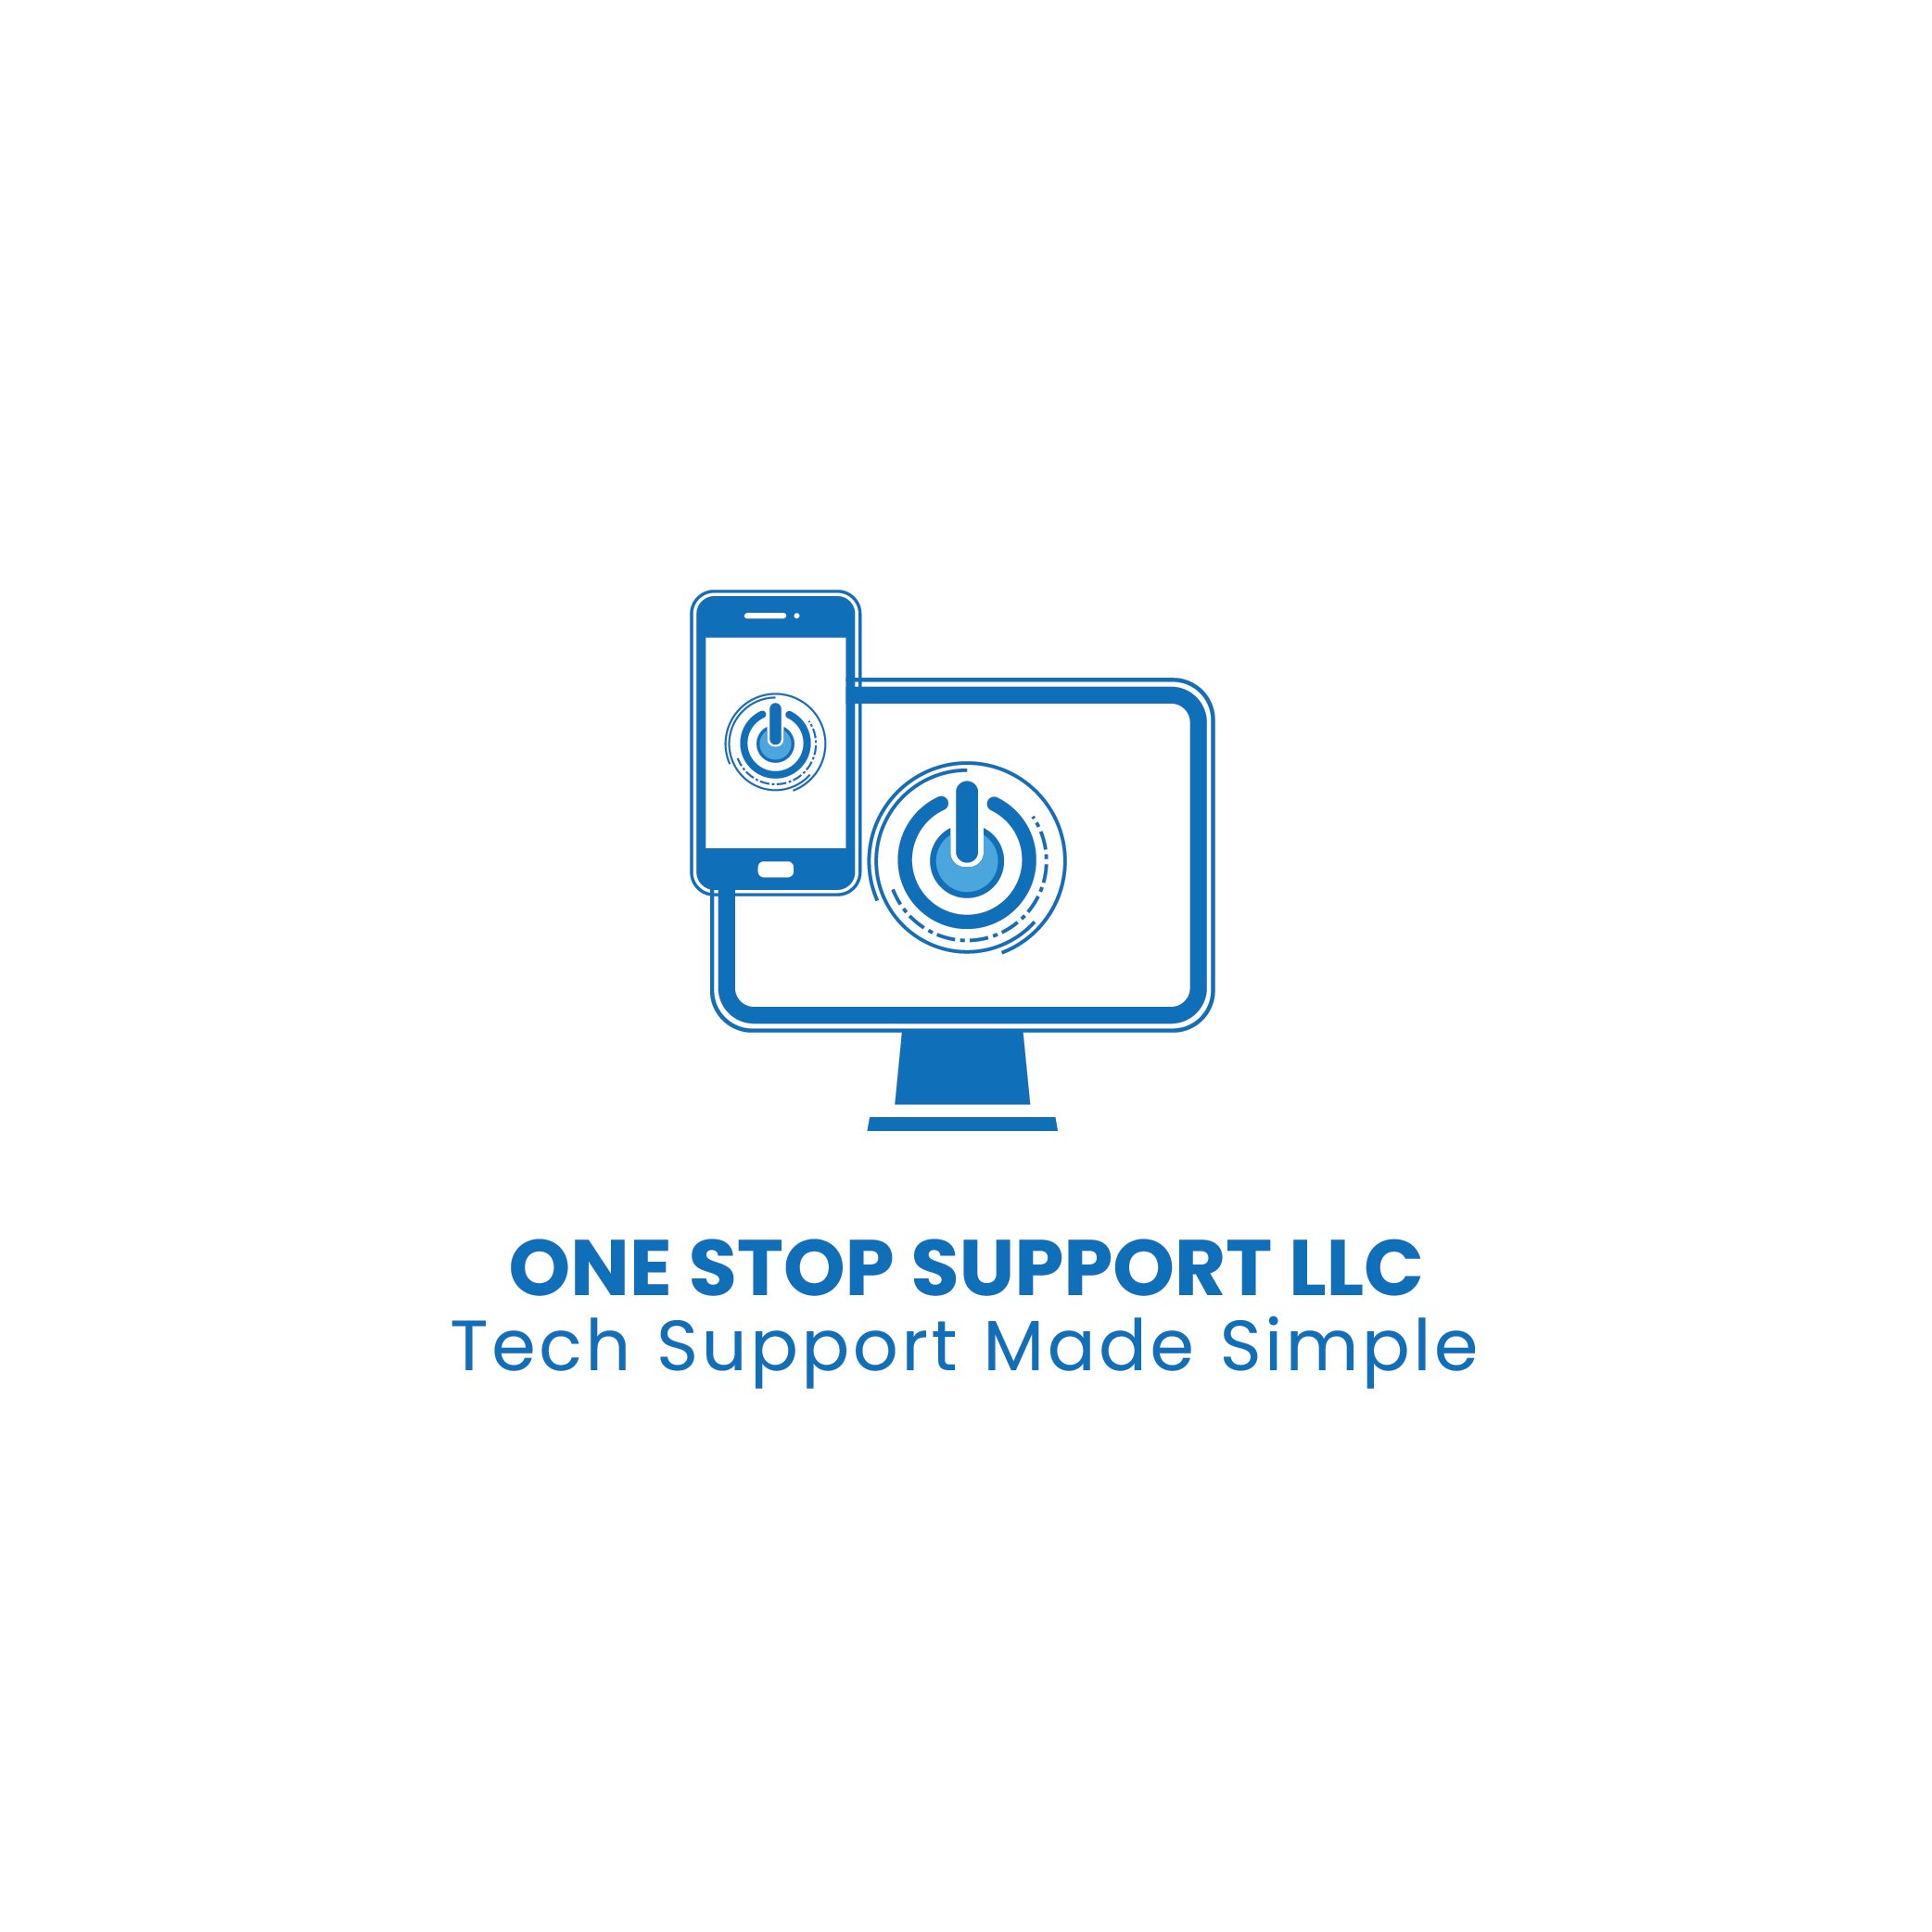 One Stop Support LLC Logo